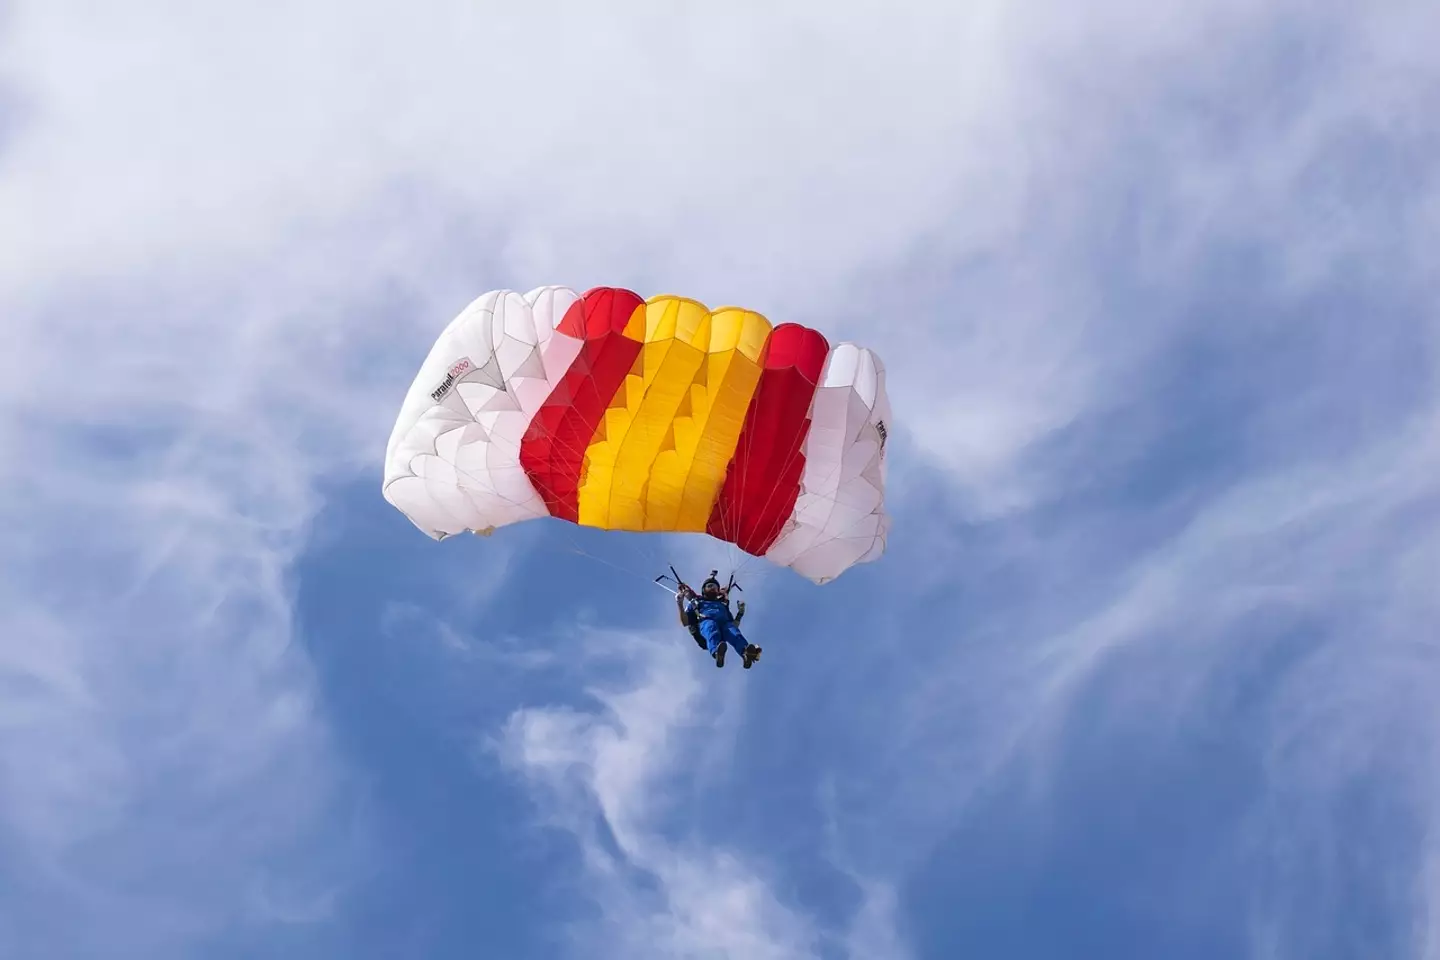 Sky diving is scary at the best of times (Pixabay)